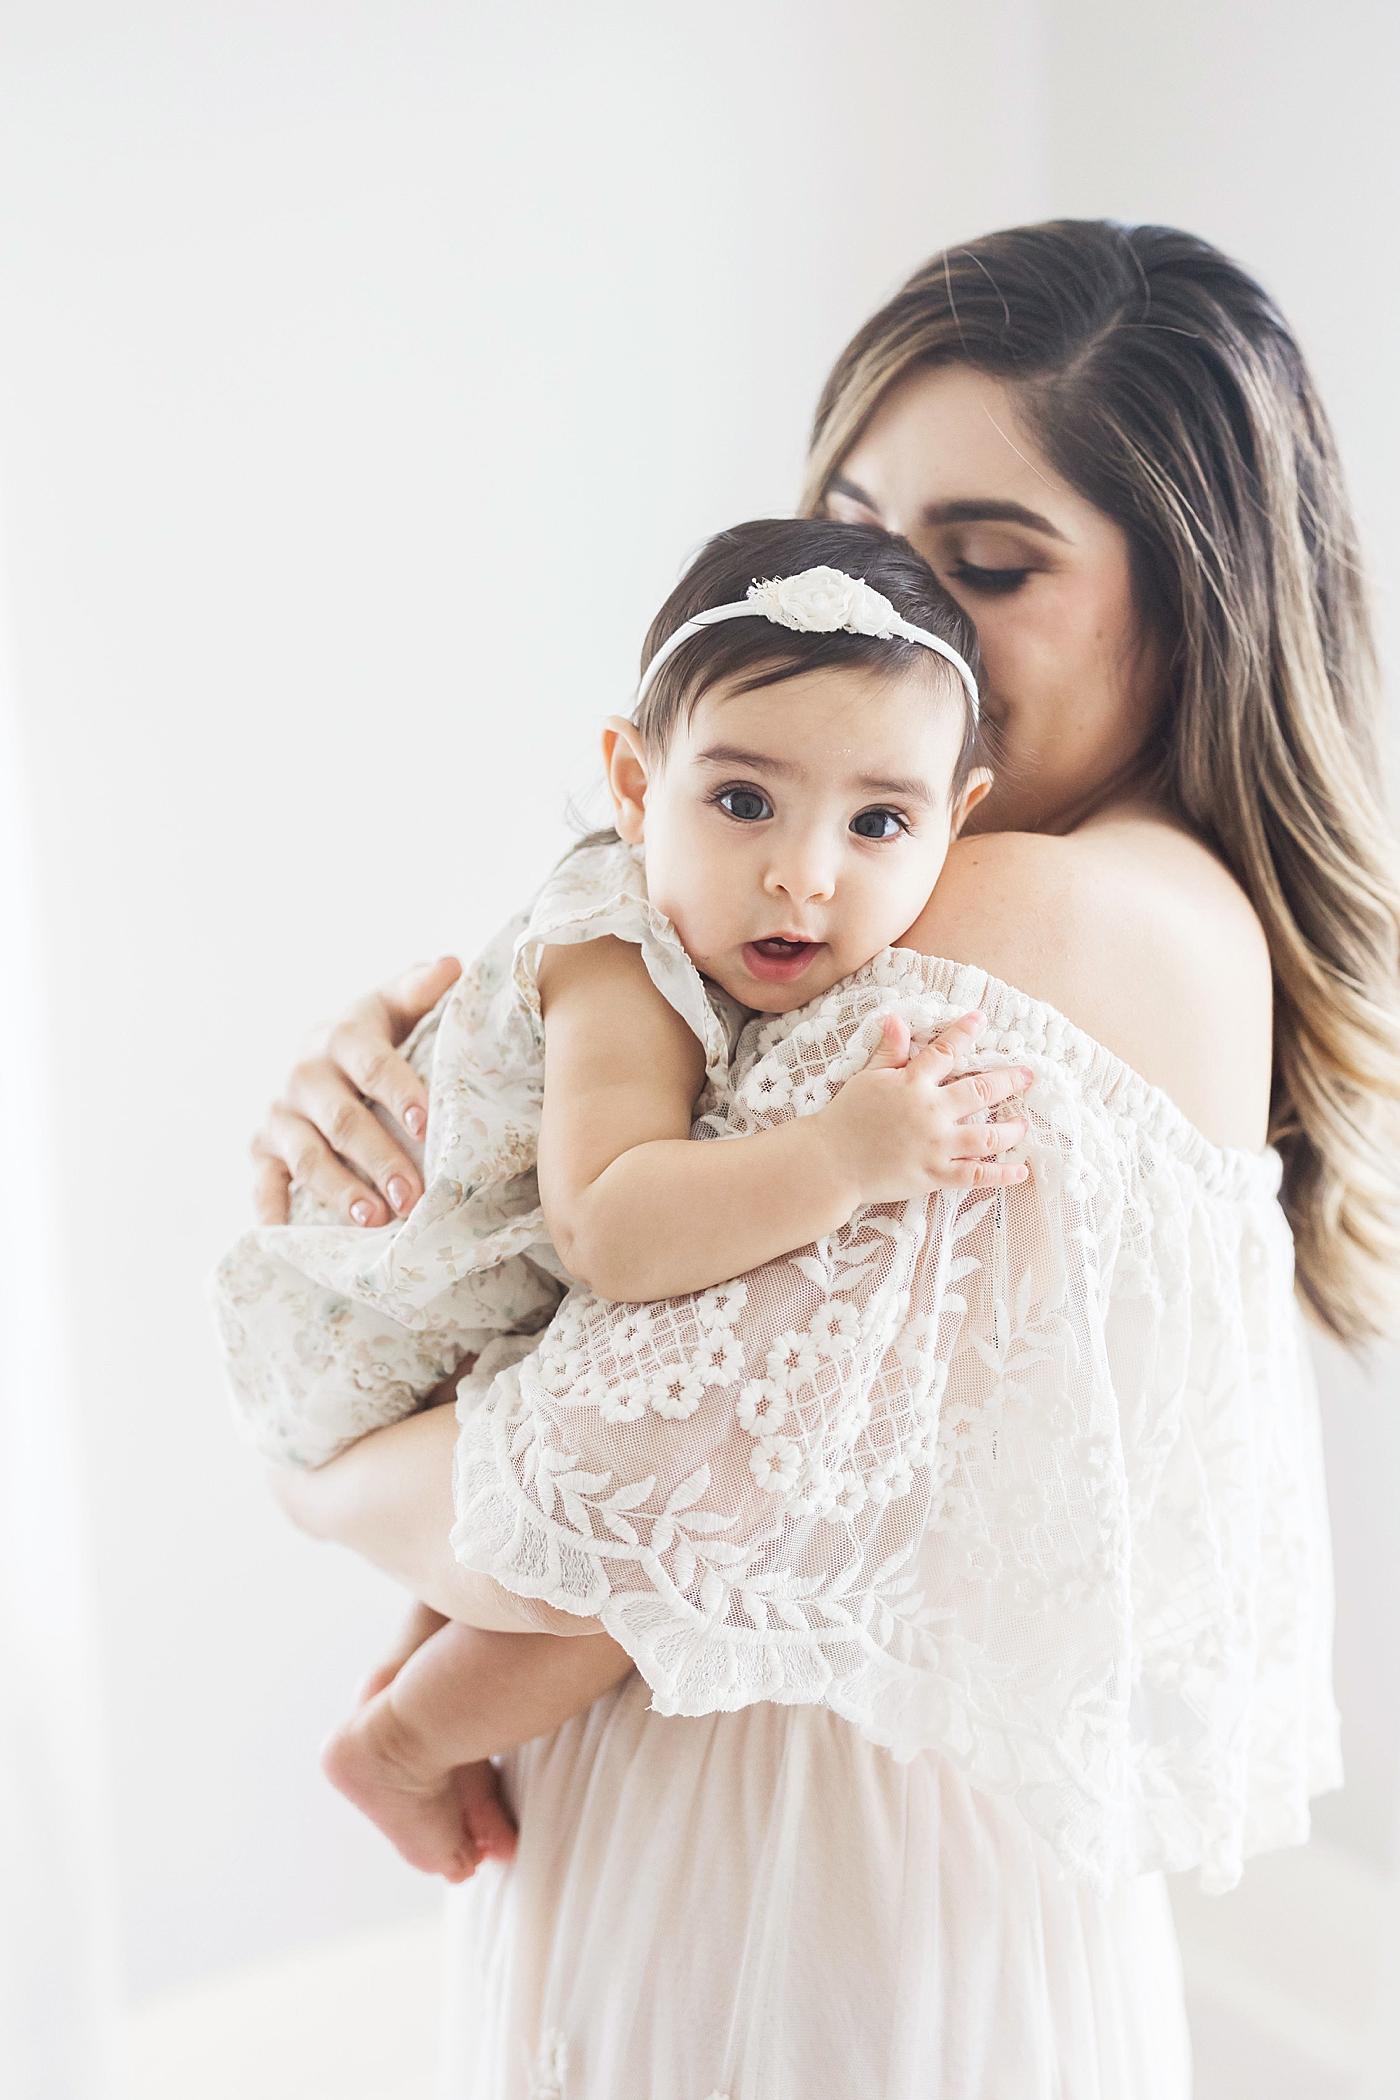 Six month old snuggled up on Mom's shoulder. Photo by Fresh Light Photography.